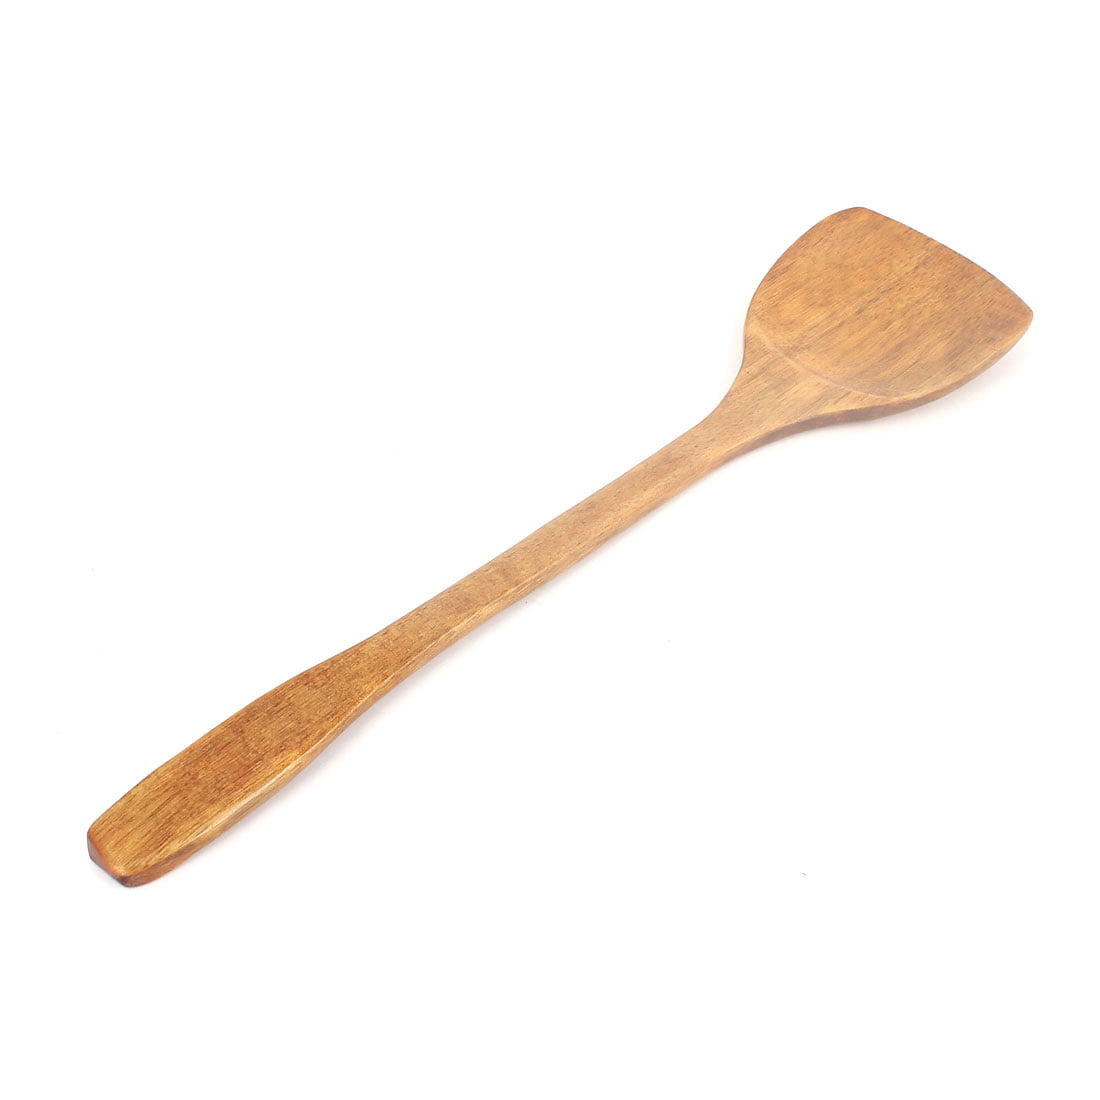 Details about  / 12.6 Inch Wooden Kitchen Cooking Spatula Long Handle Egg Pancake Turner Natural